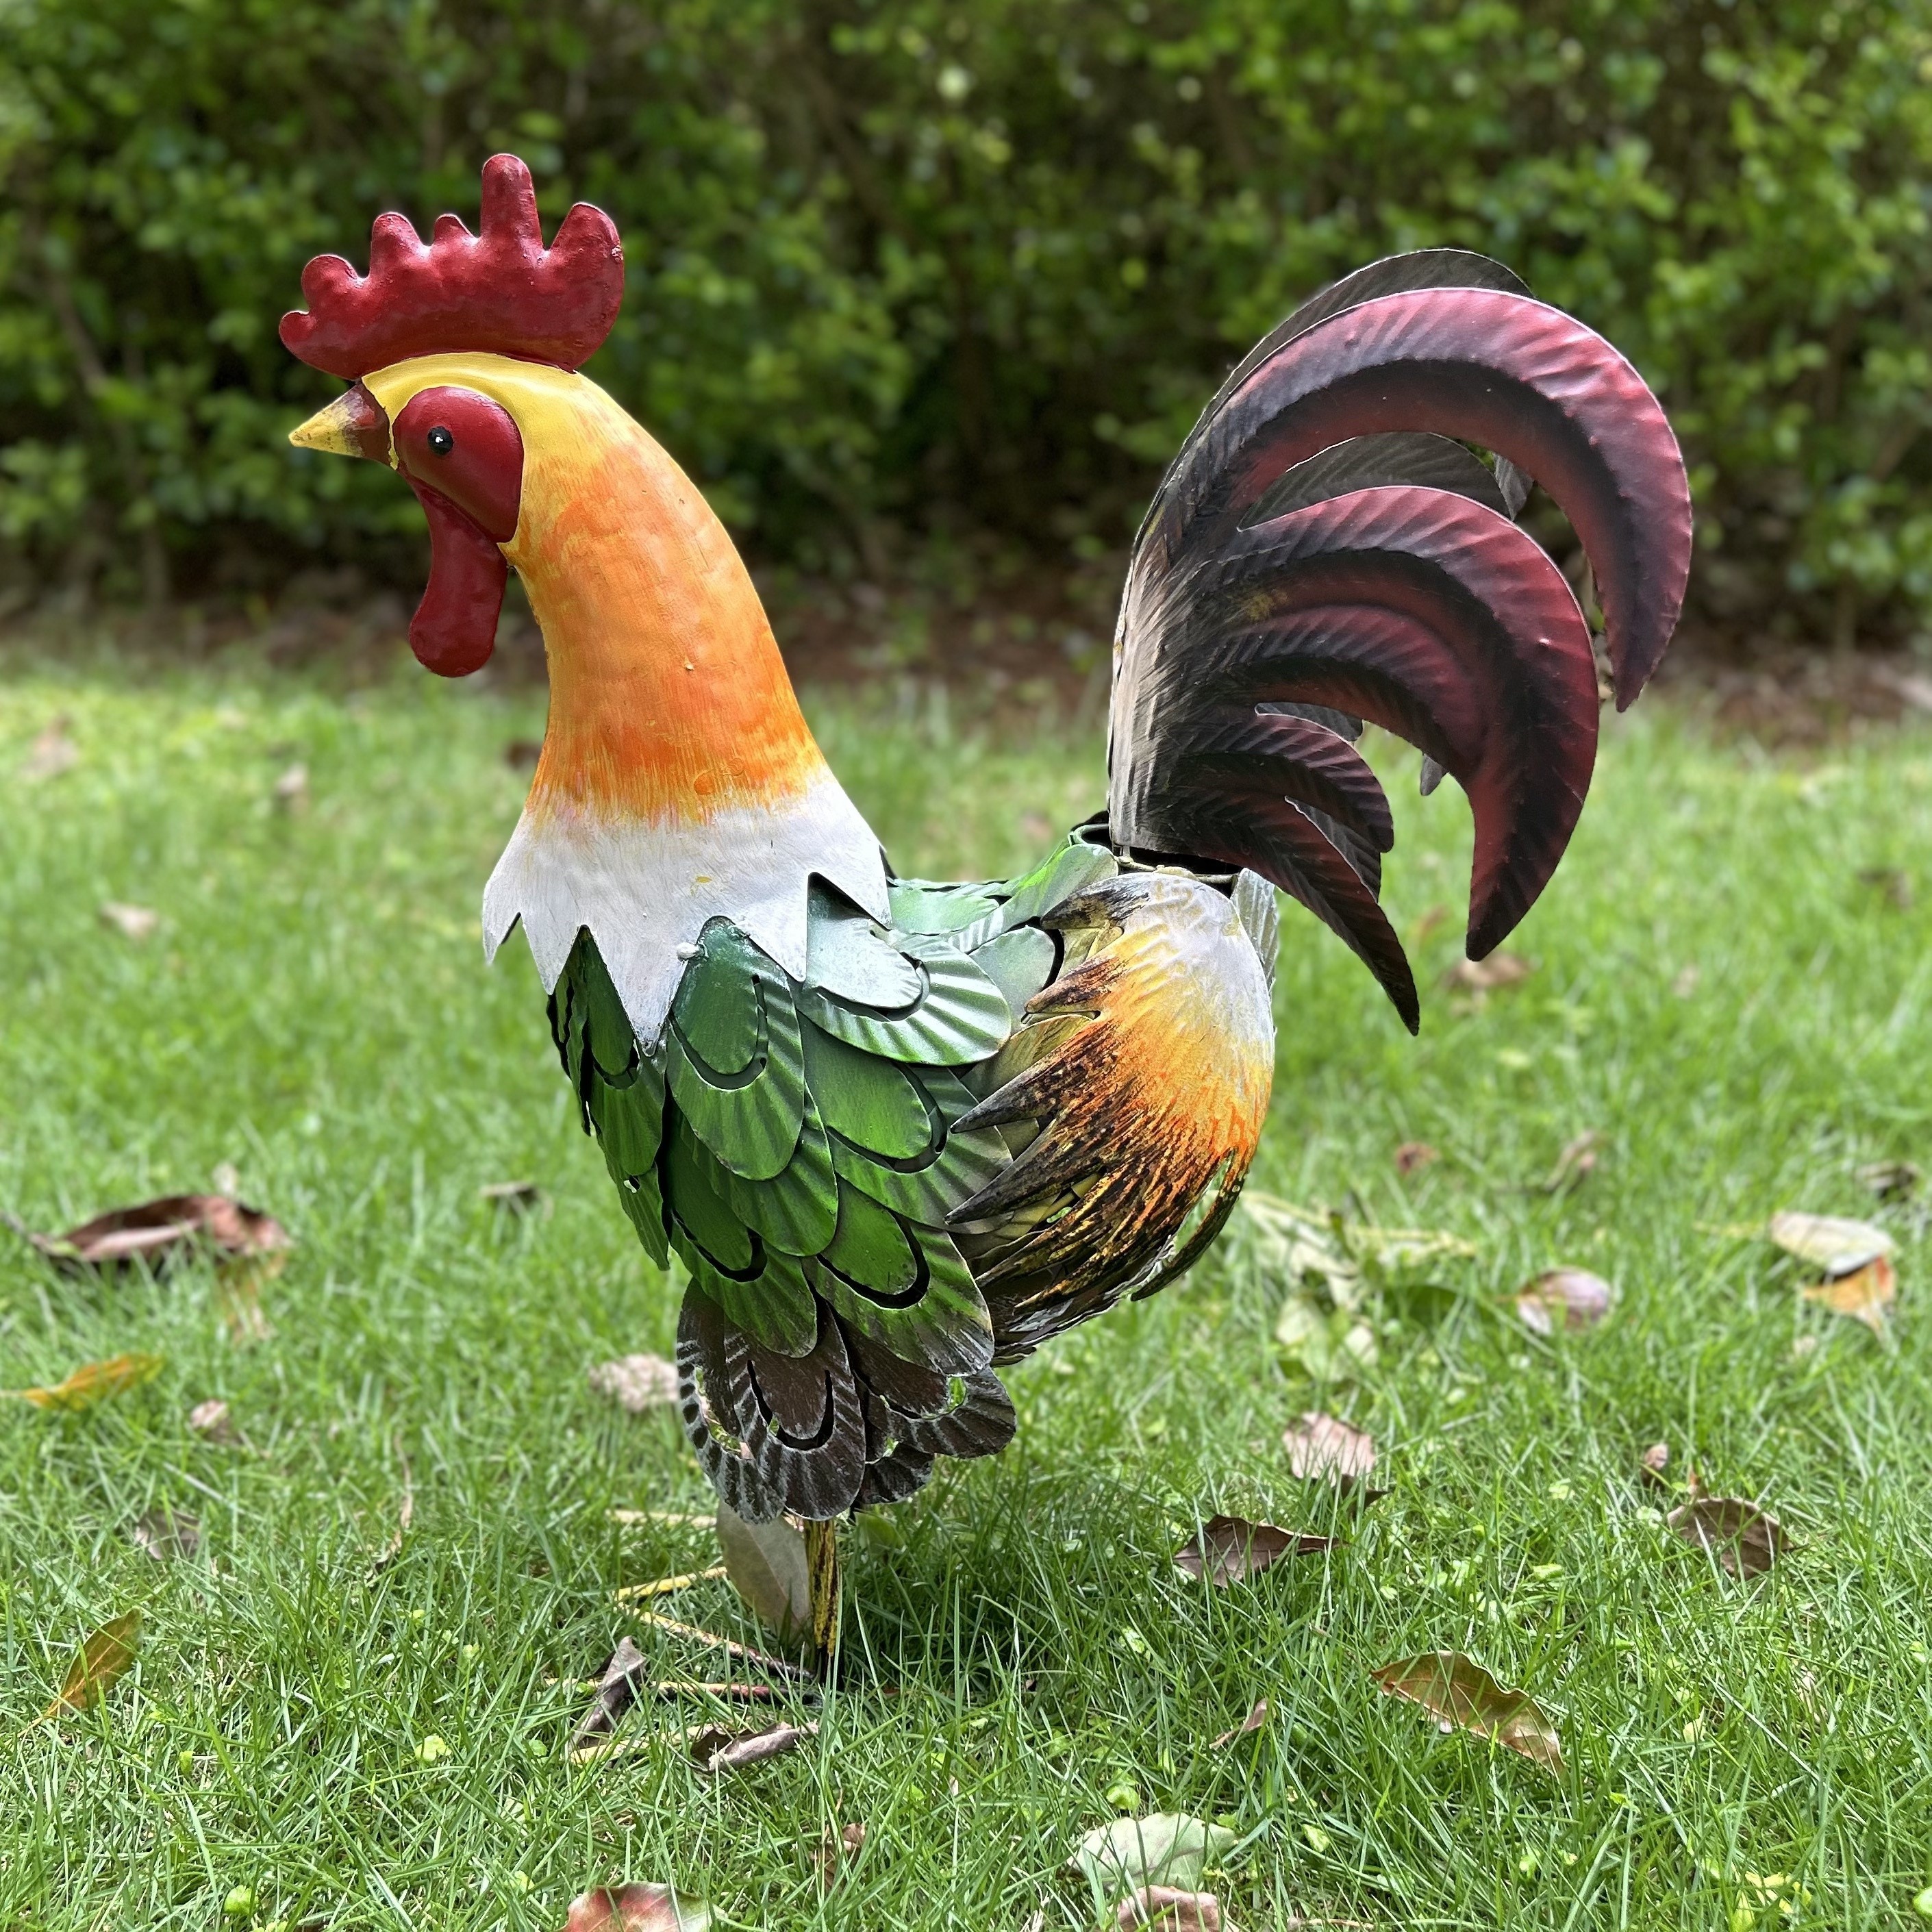 

19" Classic Metal Rooster Statue - Freestanding, Outdoor Garden & Yard Decor, Perfect For Easter Rooster Yard Decor Rooster Decor